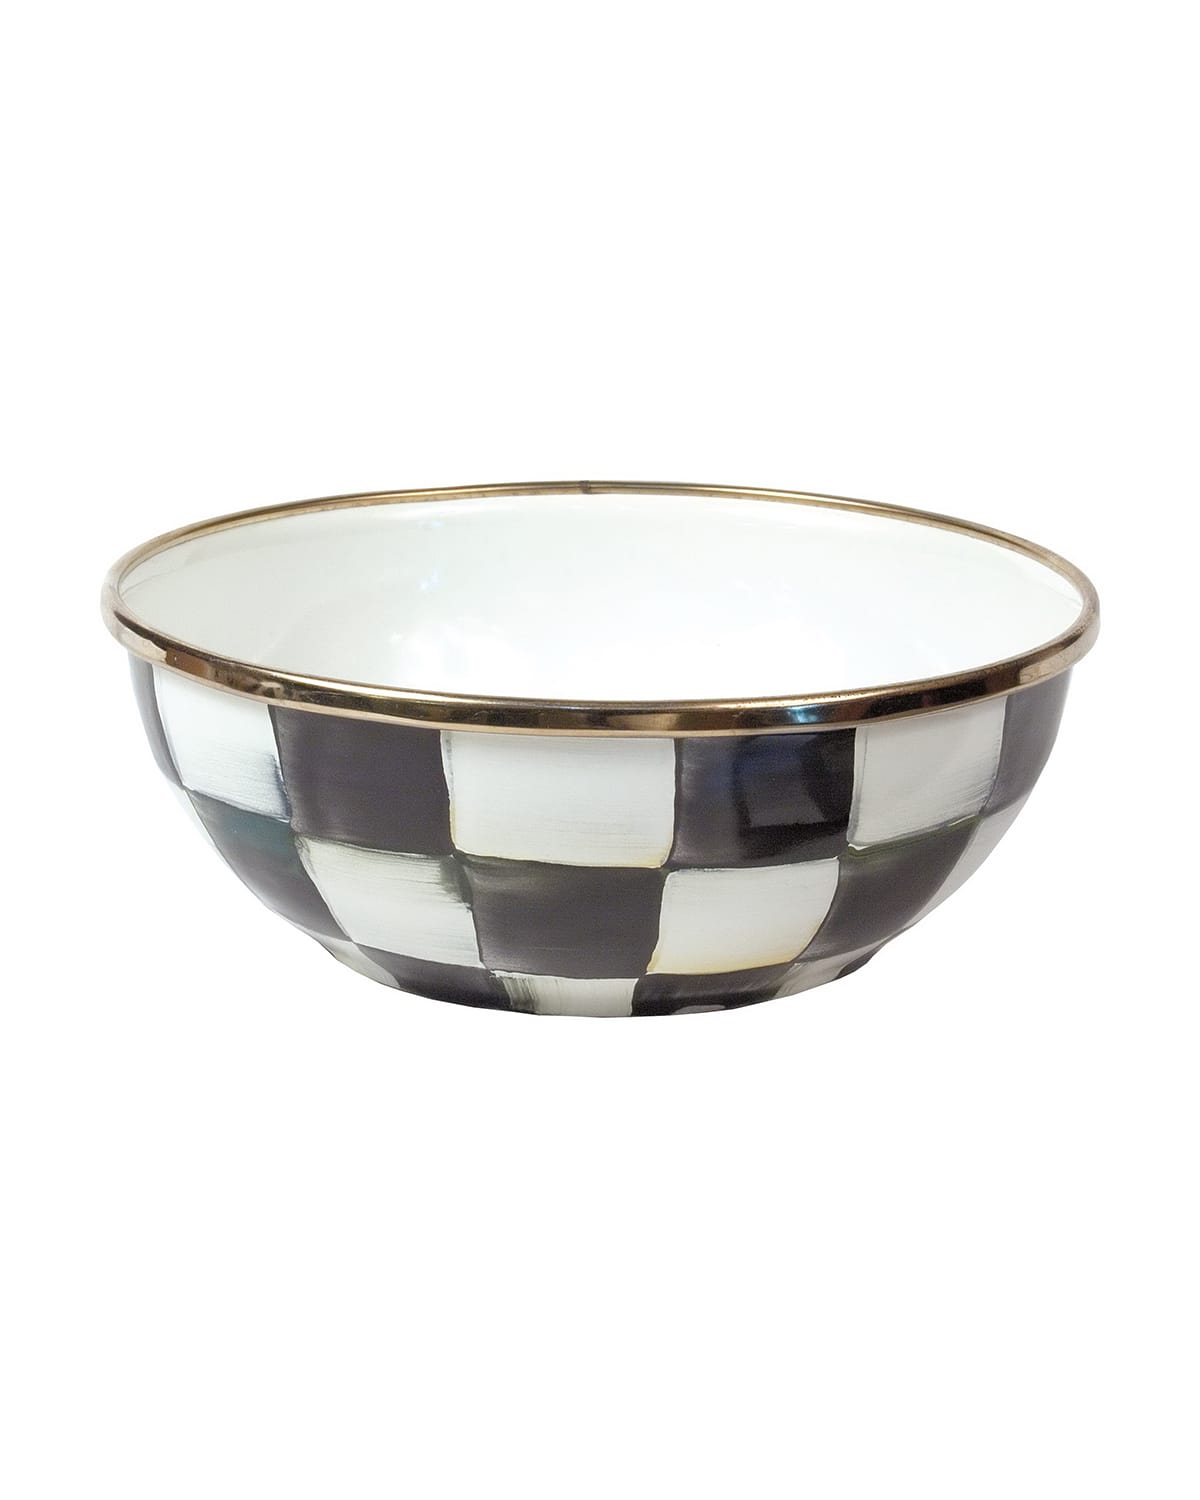 Mackenzie-childs Courtly Check Everyday Bowl In Multi